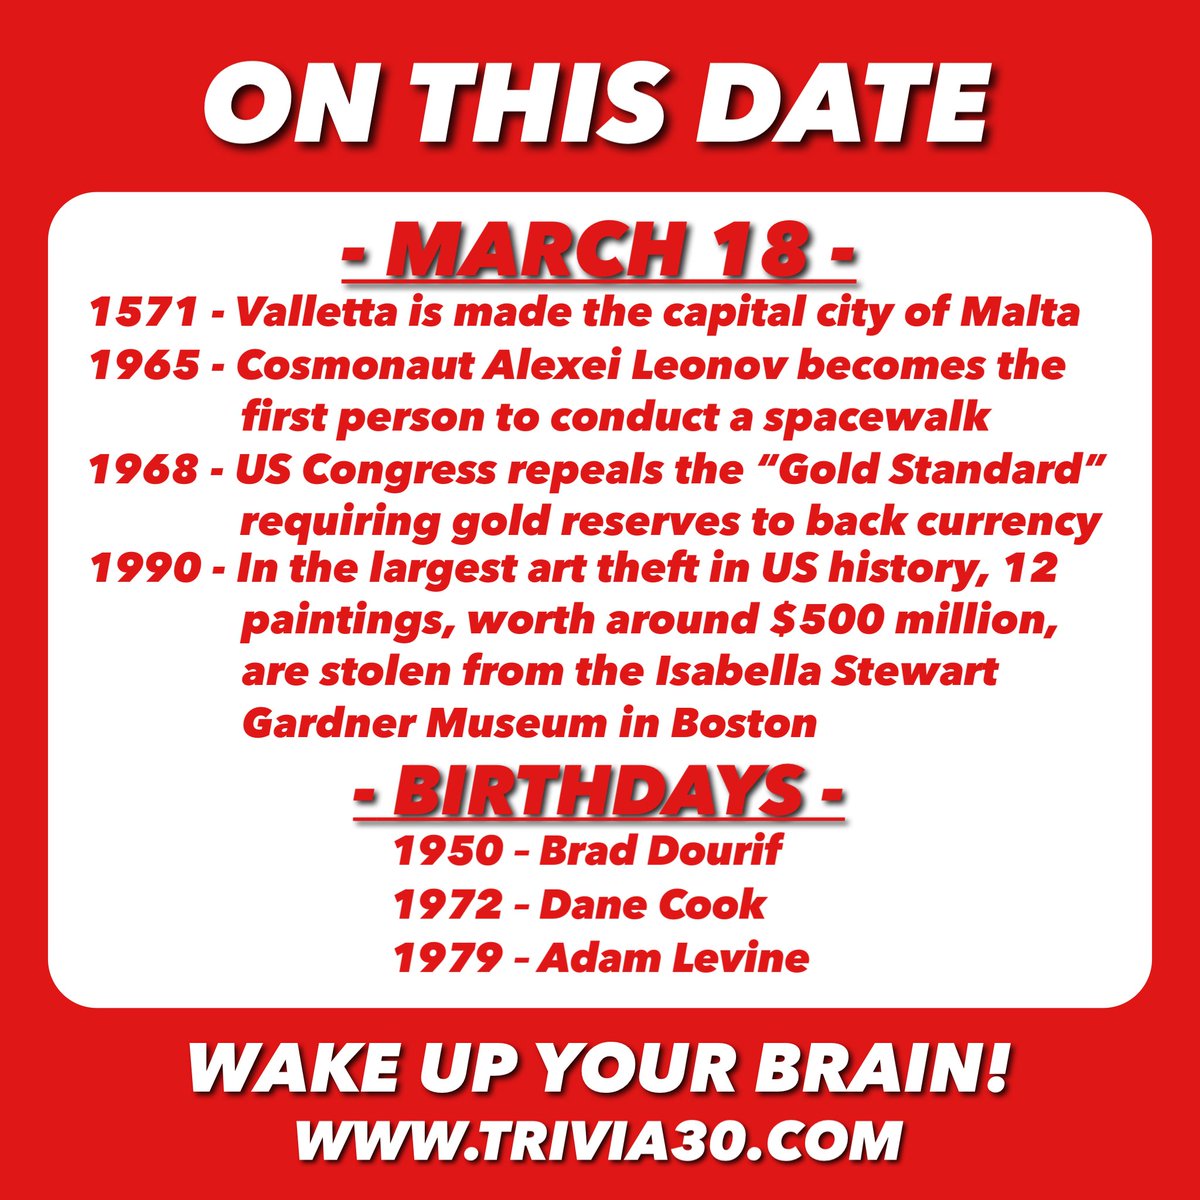 Your 3/18 OTD trivia. Join us for BINGO at Dick's Mayport or TRIVIA at The Brew Shed of Hofbrau Amelia, and have a great Monday! #TRIVIA30 #WakeUpYourBrain #Malta #Valletta #space #GOLD #Congress #Boston #art #artheist #IsabellaStewartGardner #BradDourif #DaneCook #AdamLevine